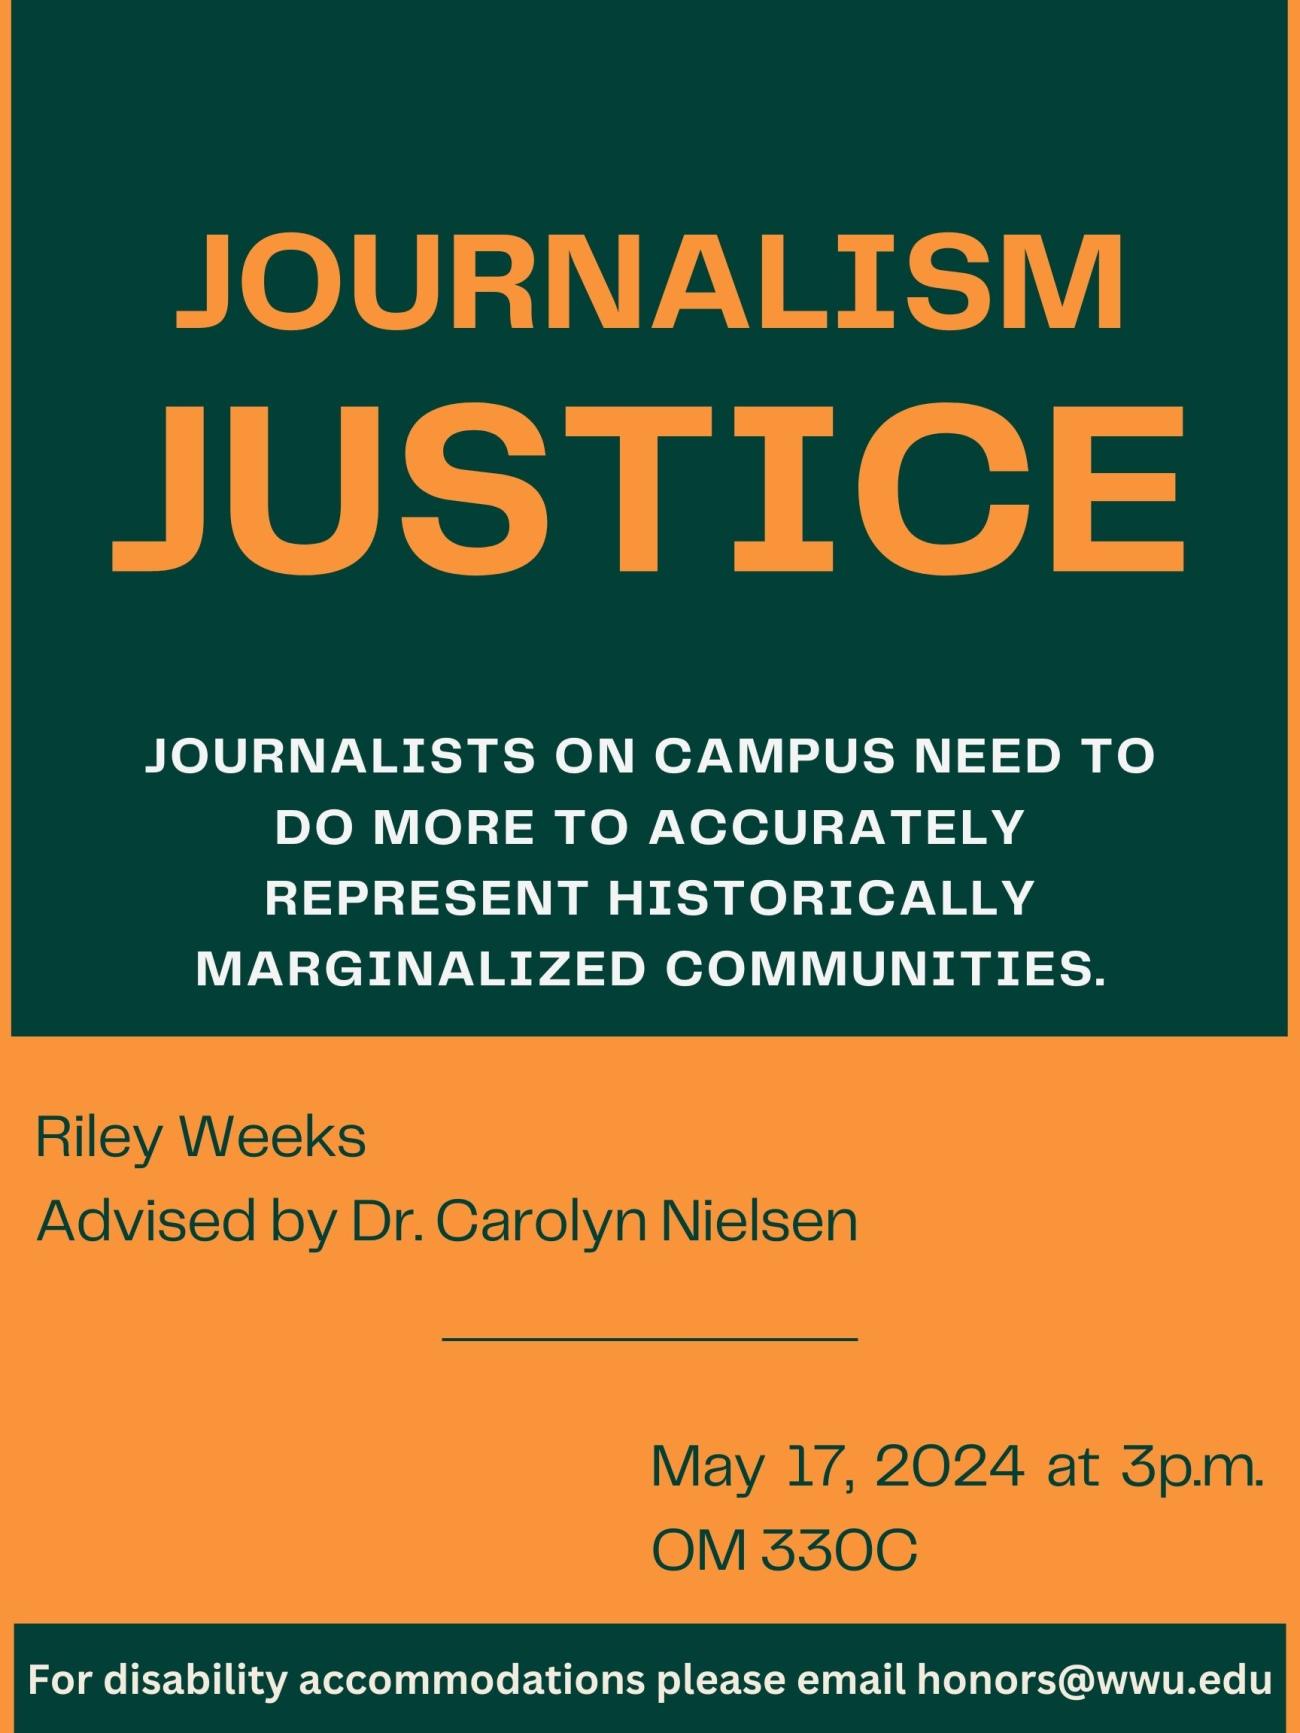 A green and peach colored poster with text that reads: Journalism Justice. Journalists on campus need to do more to accurately represent historically marginalized communities. By Riley Weeks. Advised by Dr. Carolyn Nielsen. May 17, 2024 at 3p.m. OM 330C. For disability accommodations please email honors@wwu.edu. 